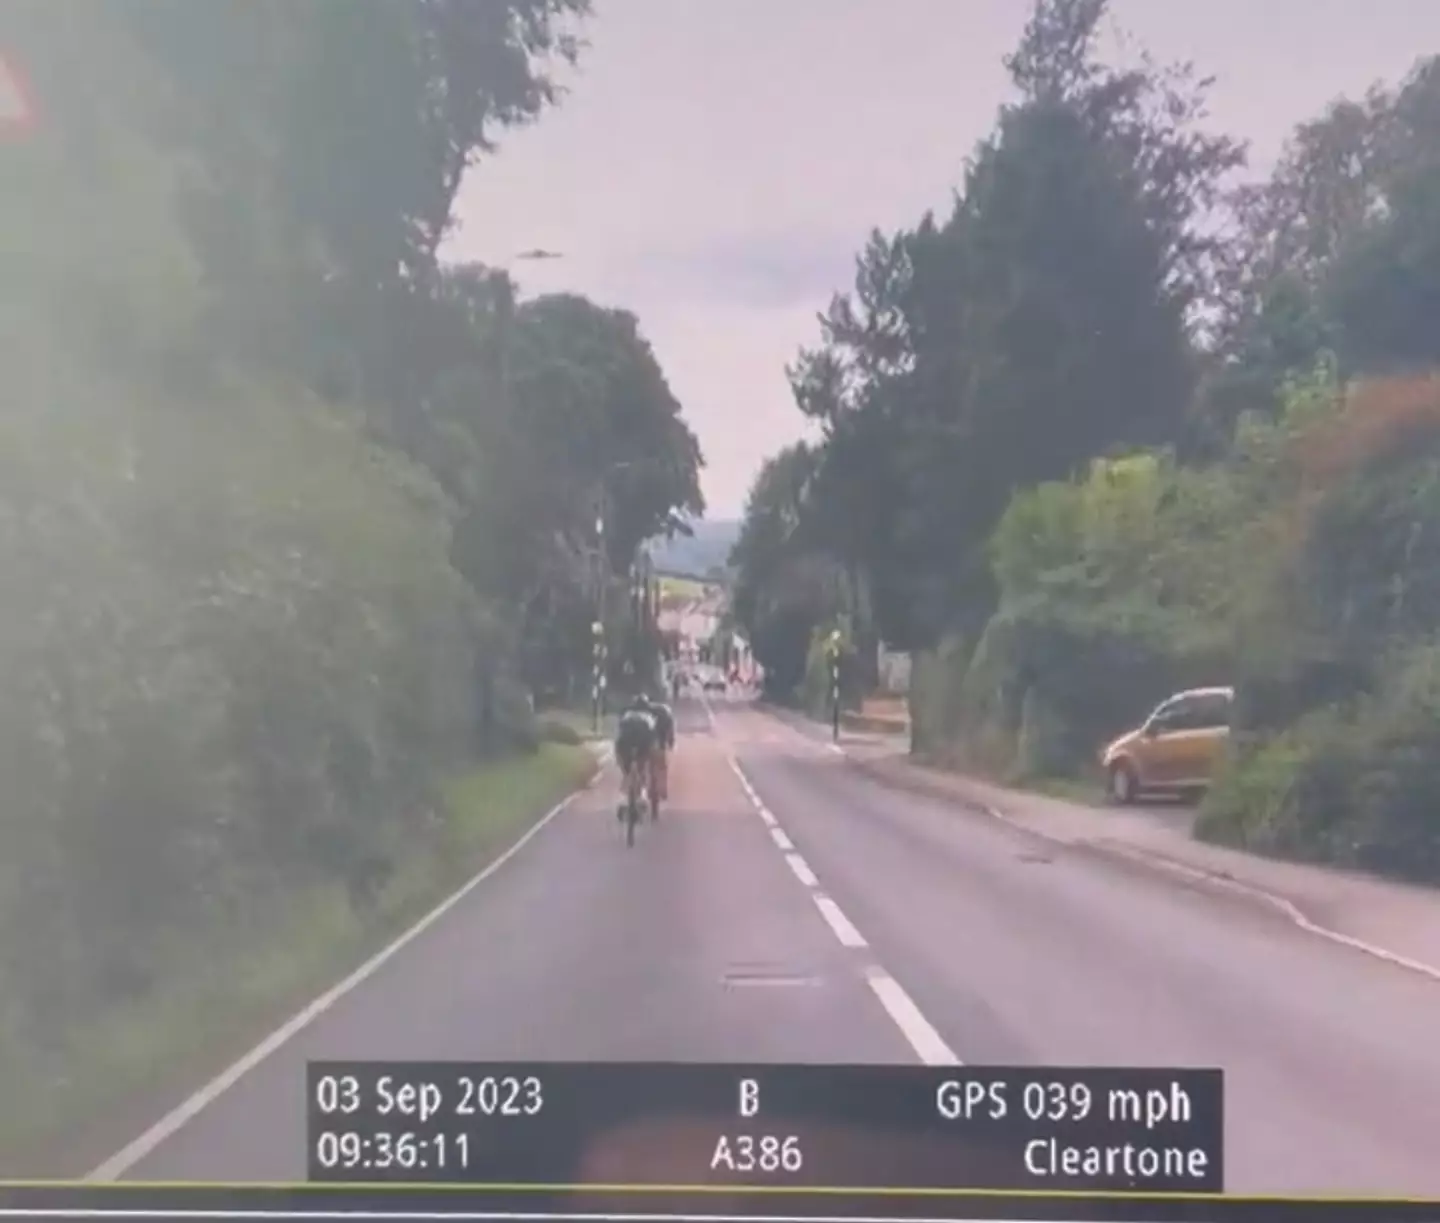 "Cyclists, please be mindful of your speeds" says police